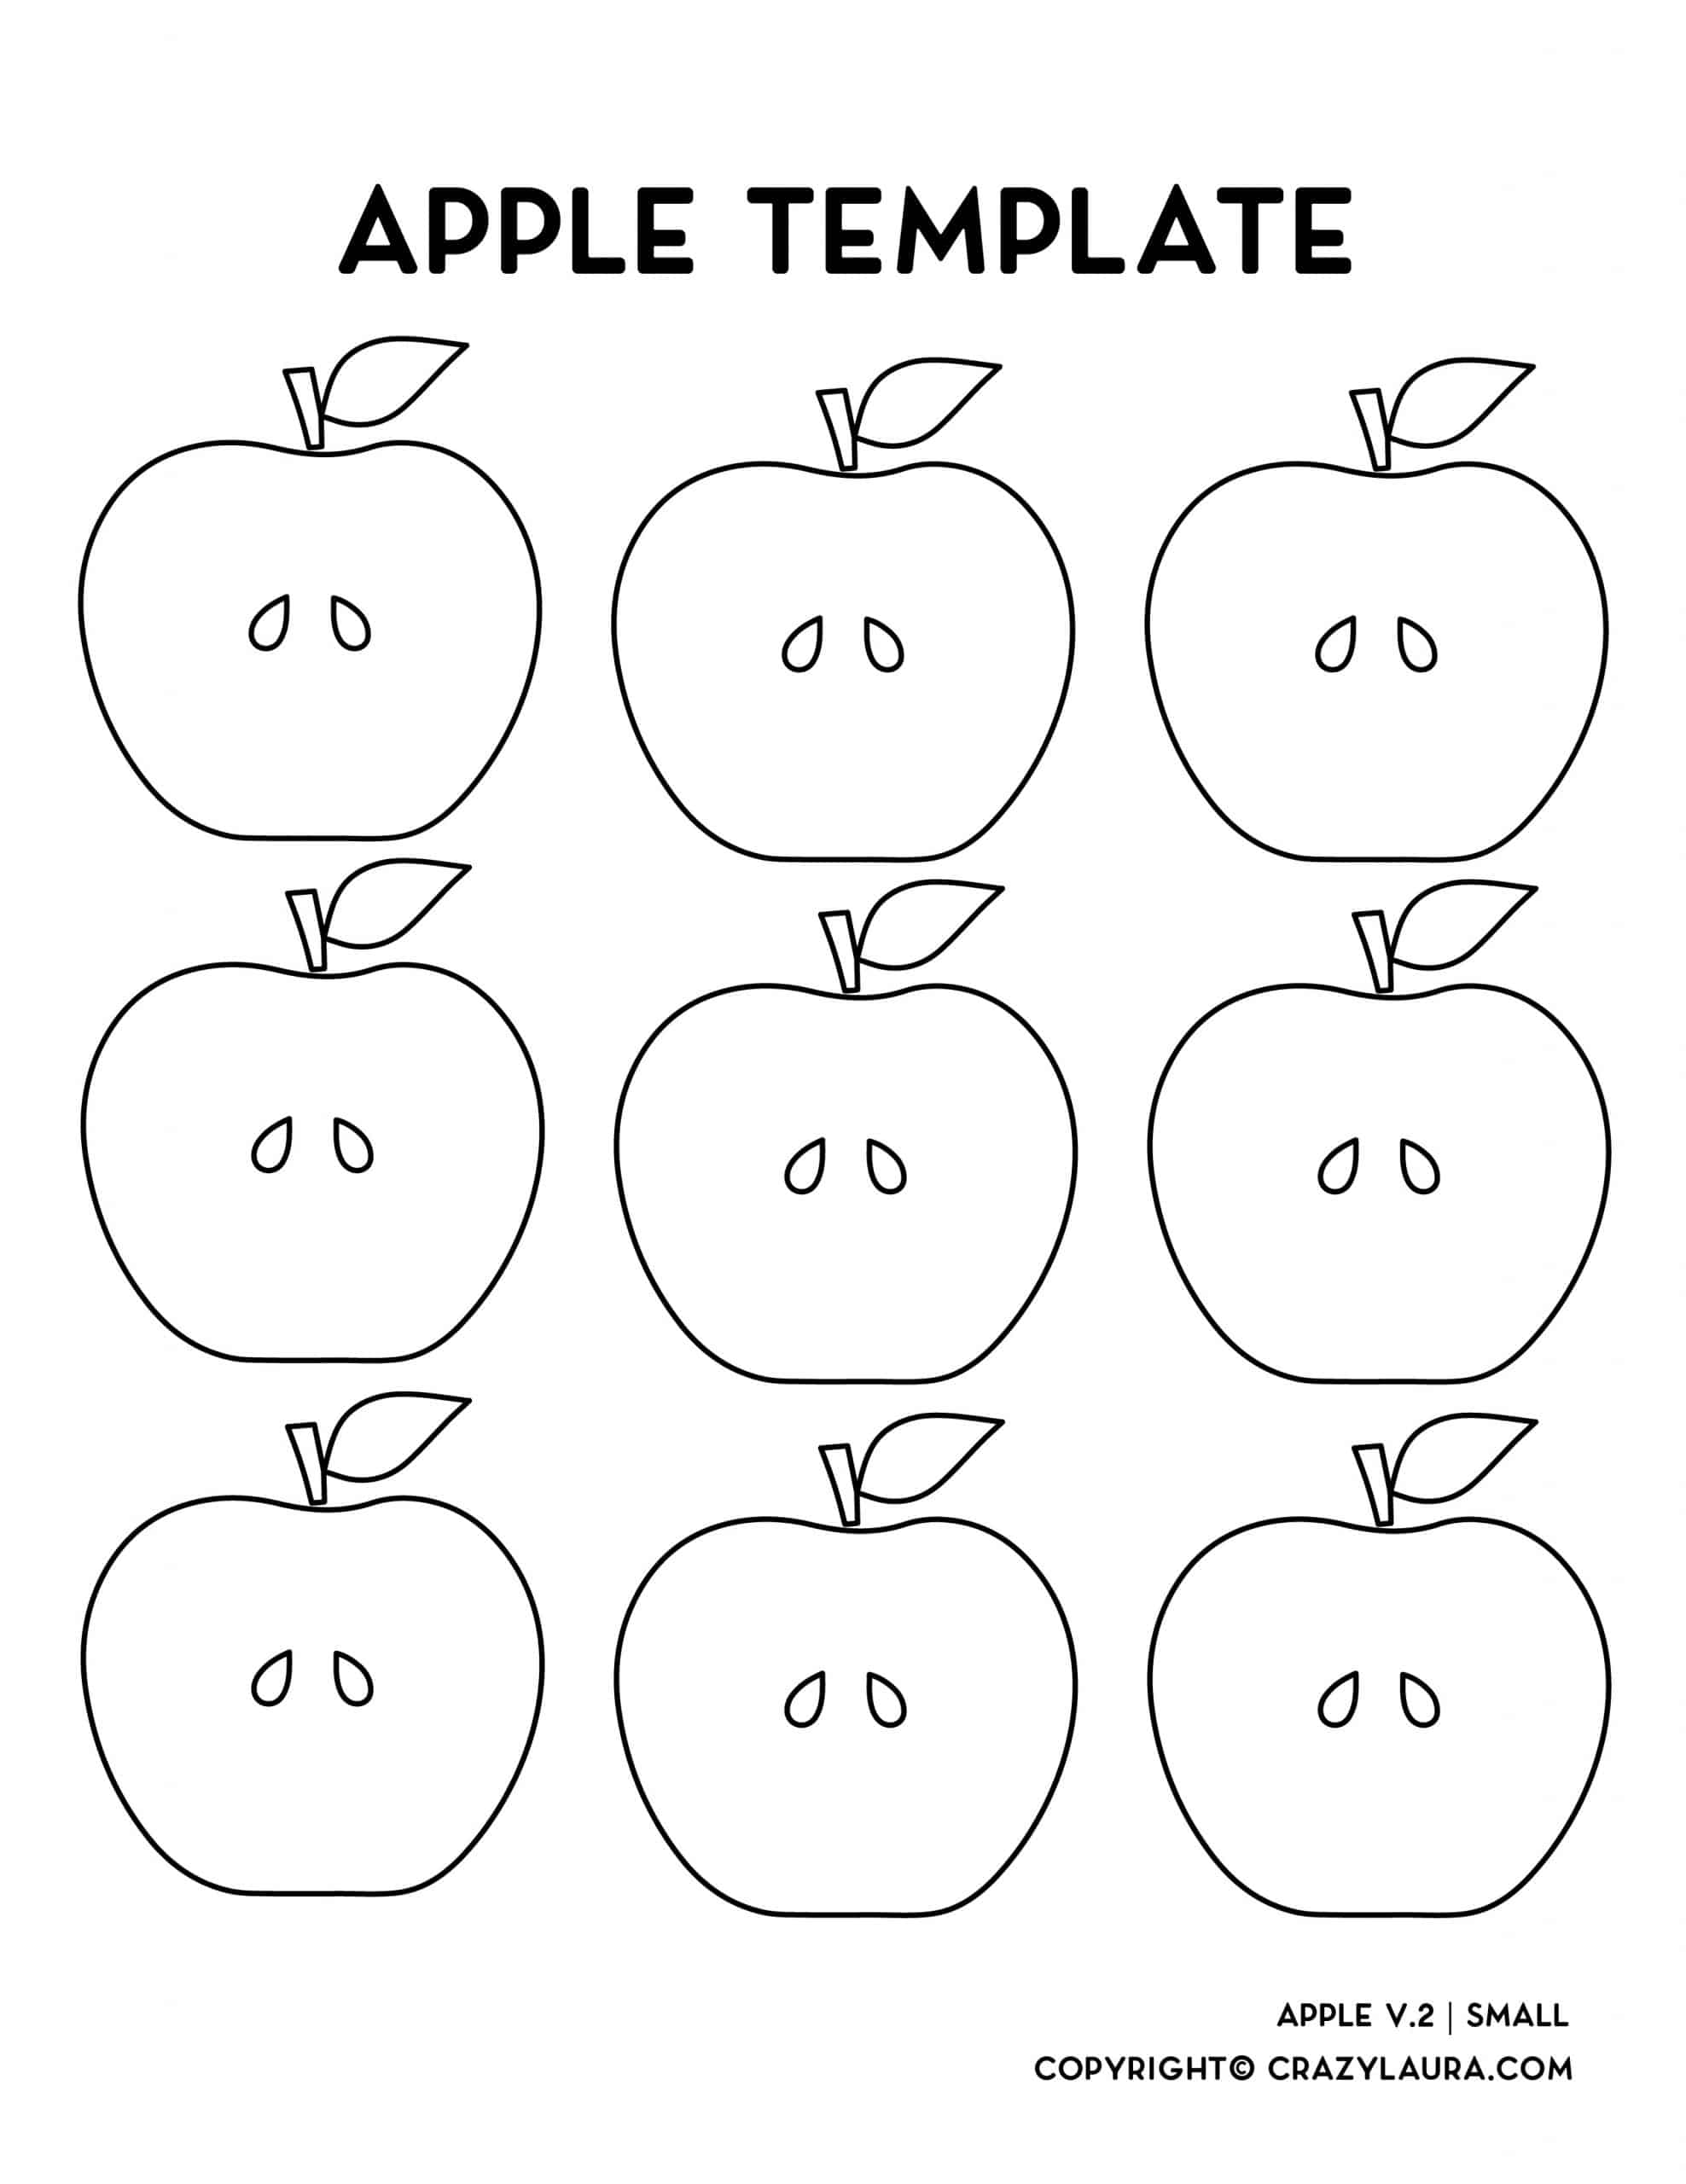 small outline template for apples